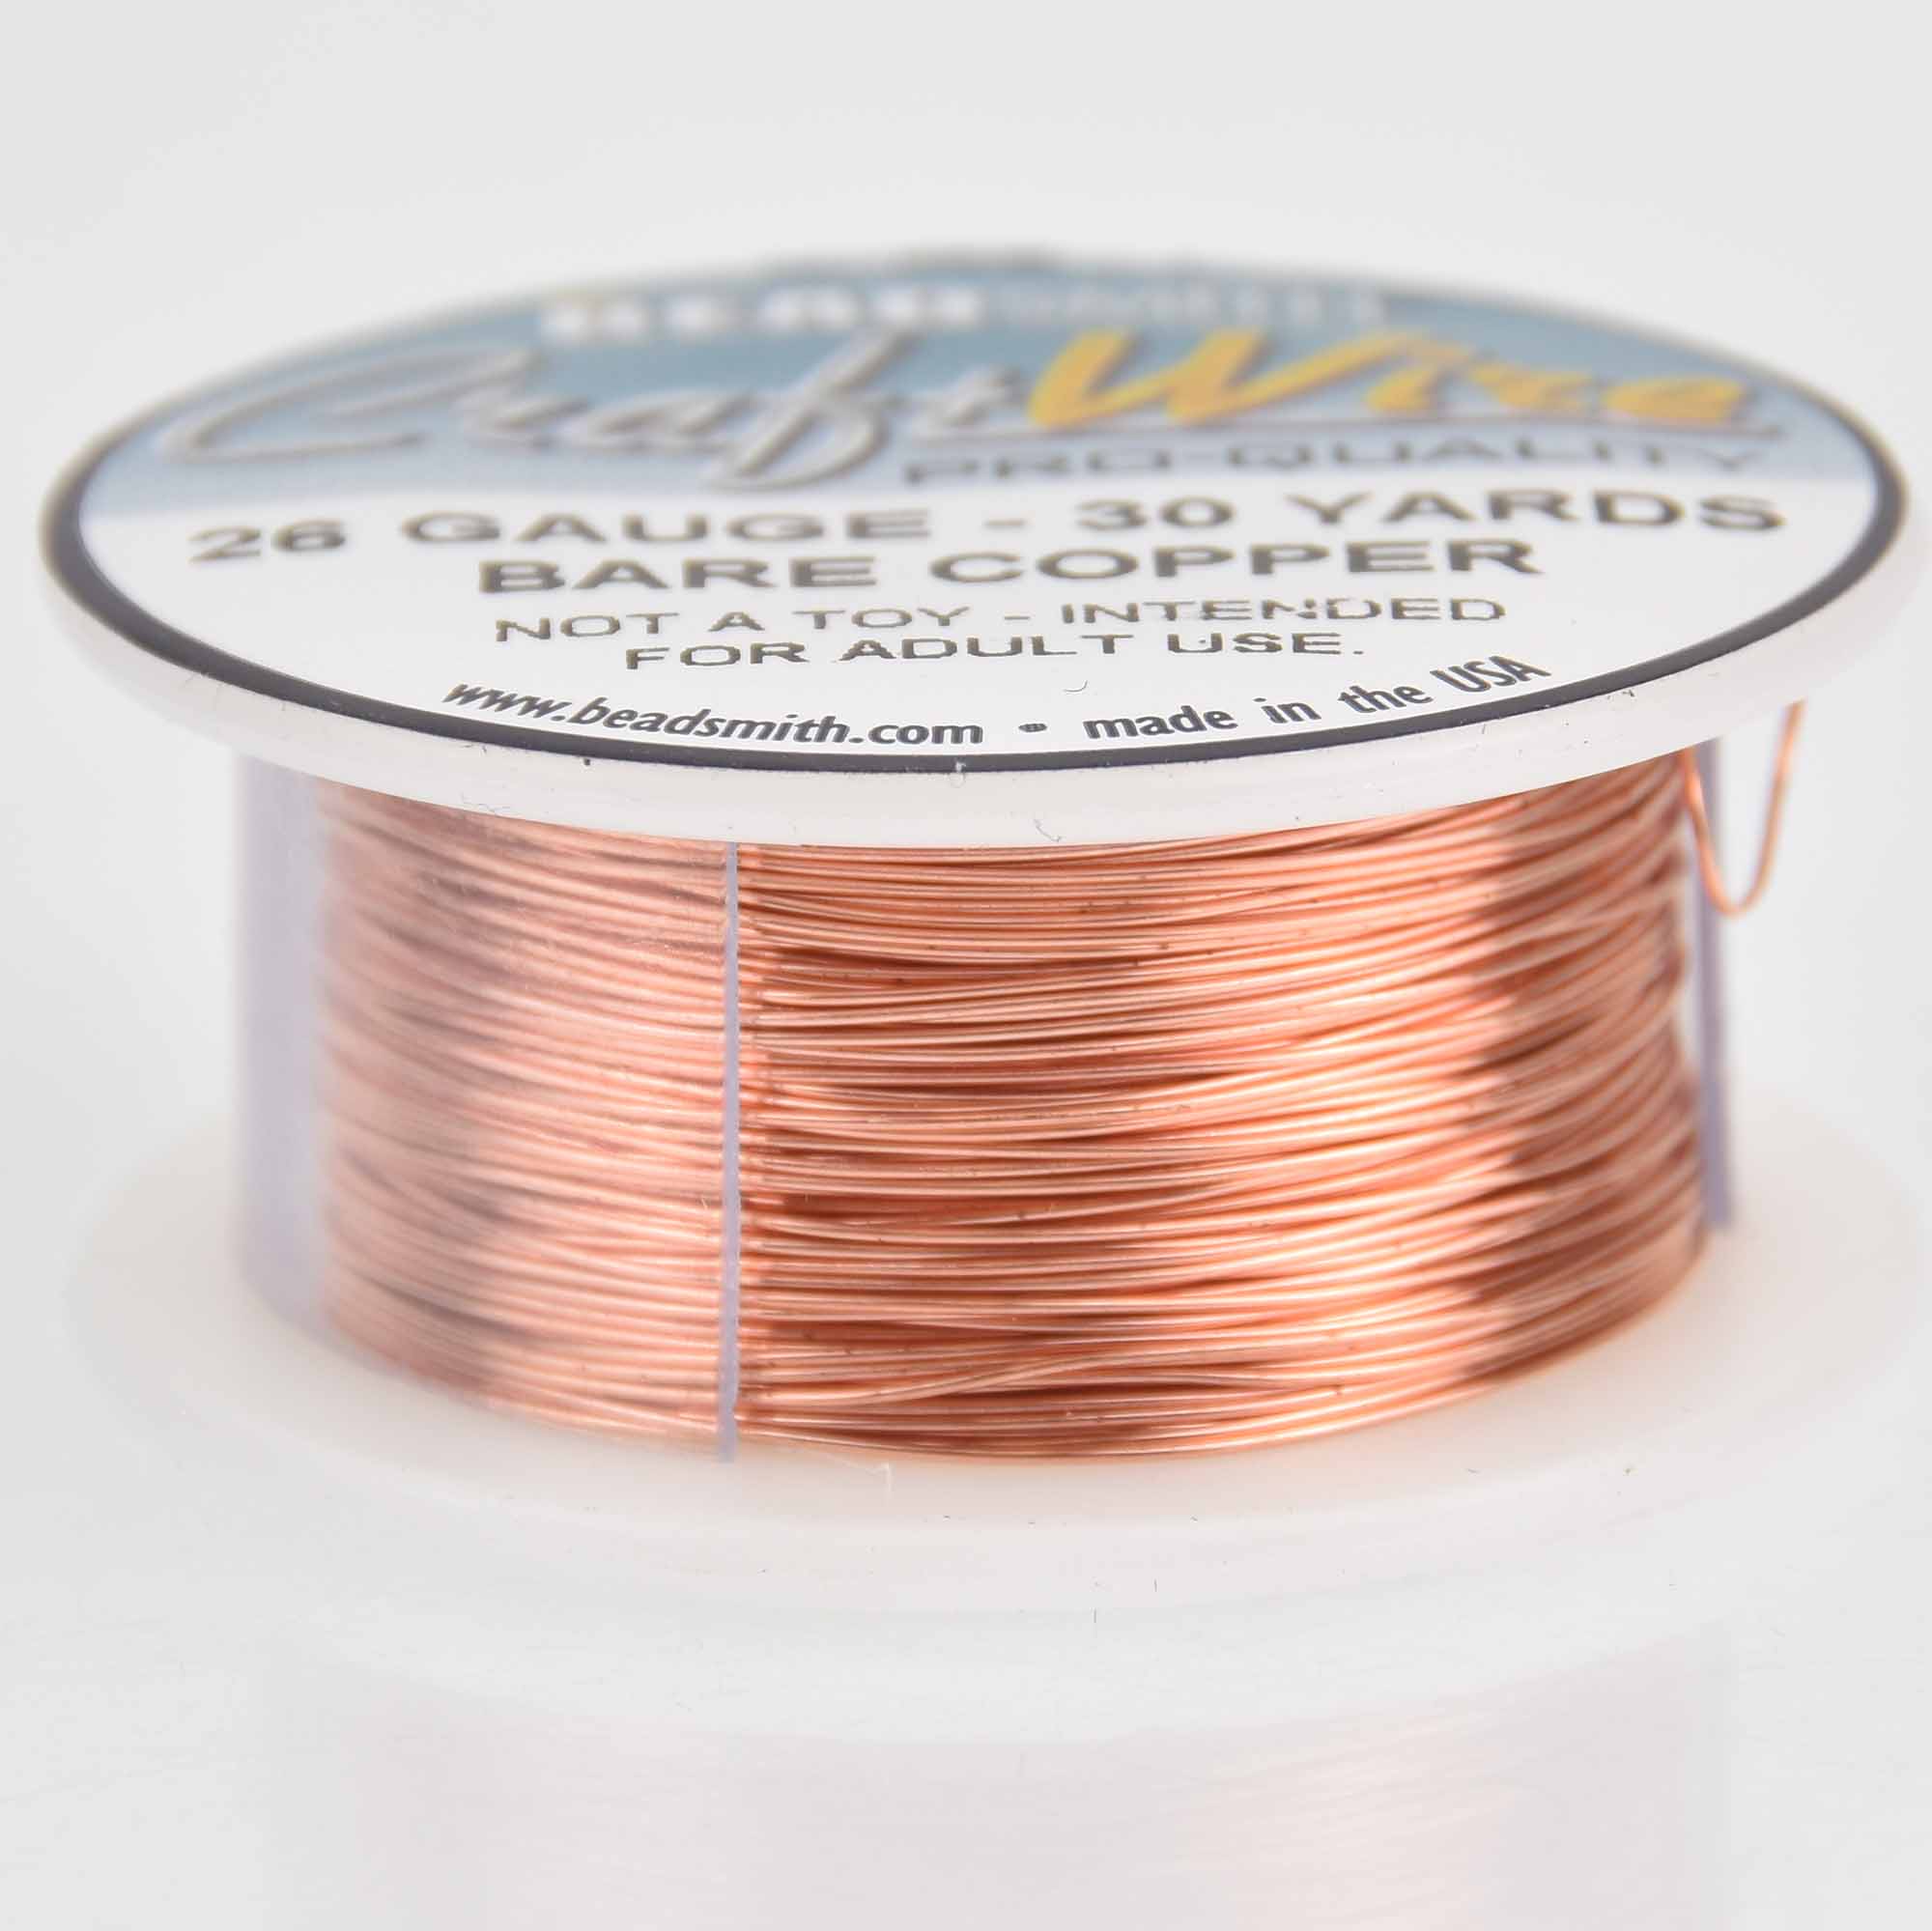 The Beadsmith Wire Elements 26 Gauge Tarnish Resistant Soft Temper Wire, 30yd. in Bare Copper | Michaels